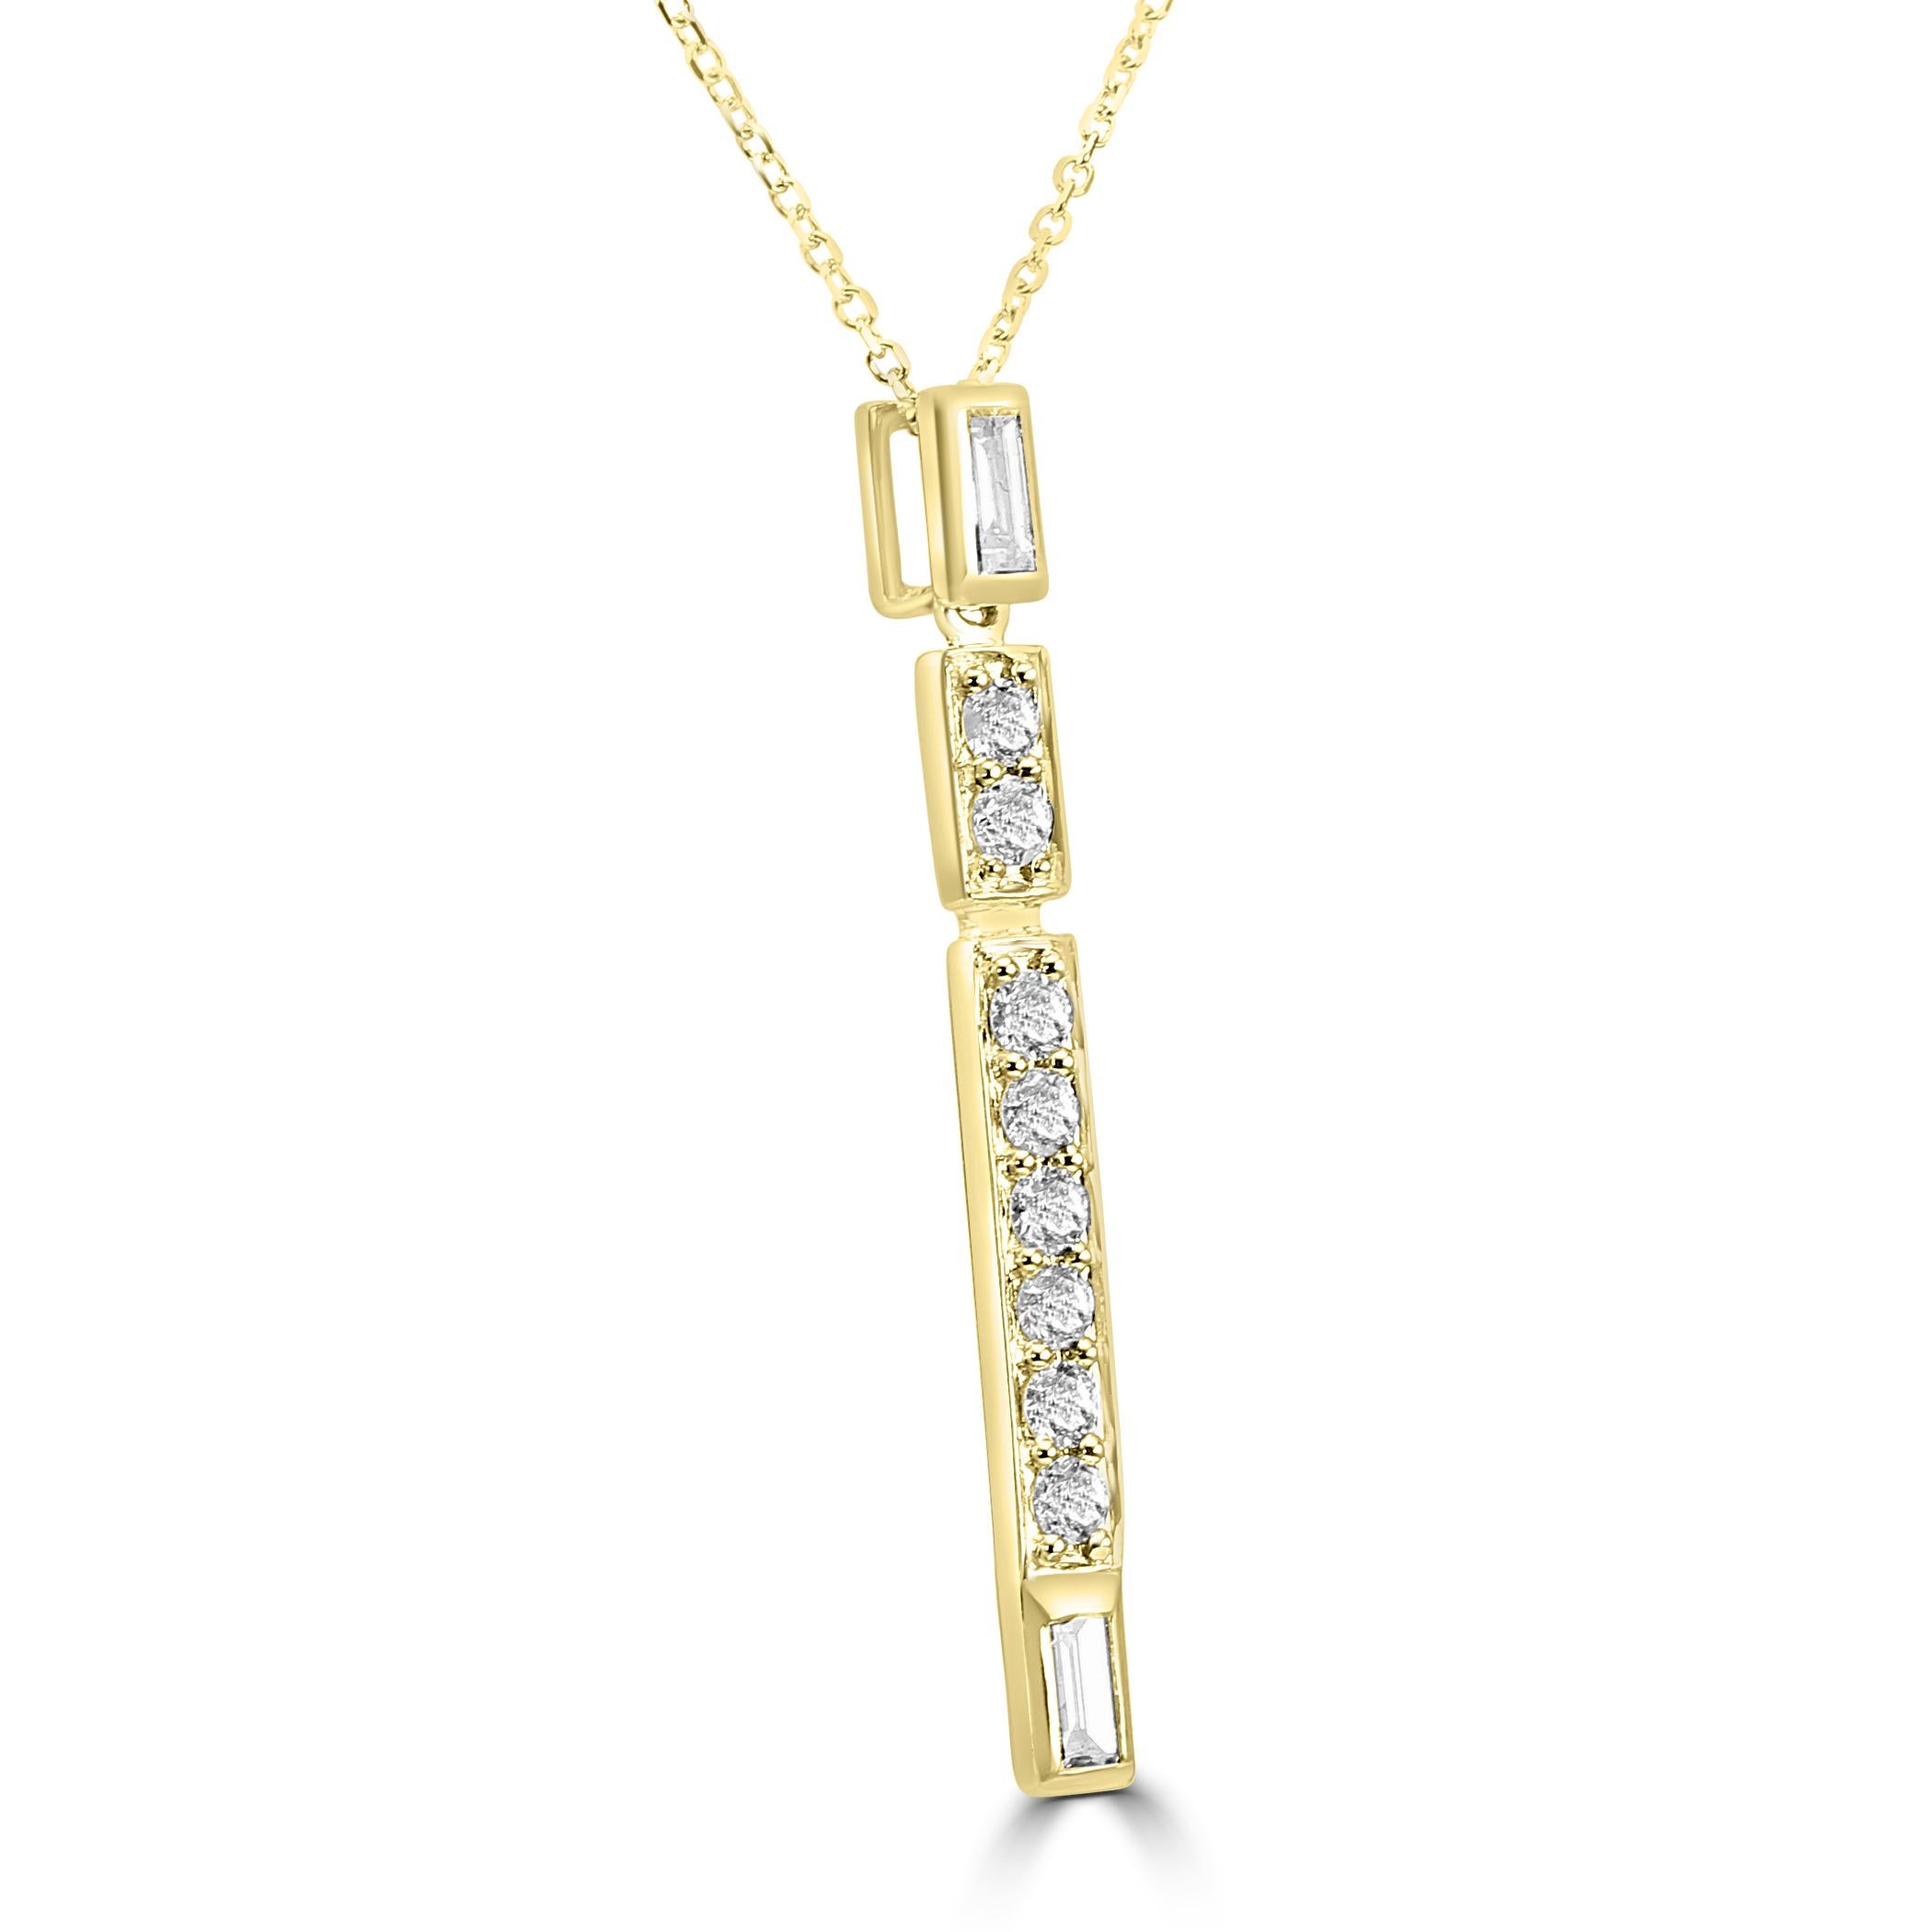  This necklace is a perfect blend of timeless beauty and modern style, making it a versatile and captivating accessory for any occasion.

The pendant showcases a total weight of 0.32 carat White Diamond rounds, each carefully selected for its